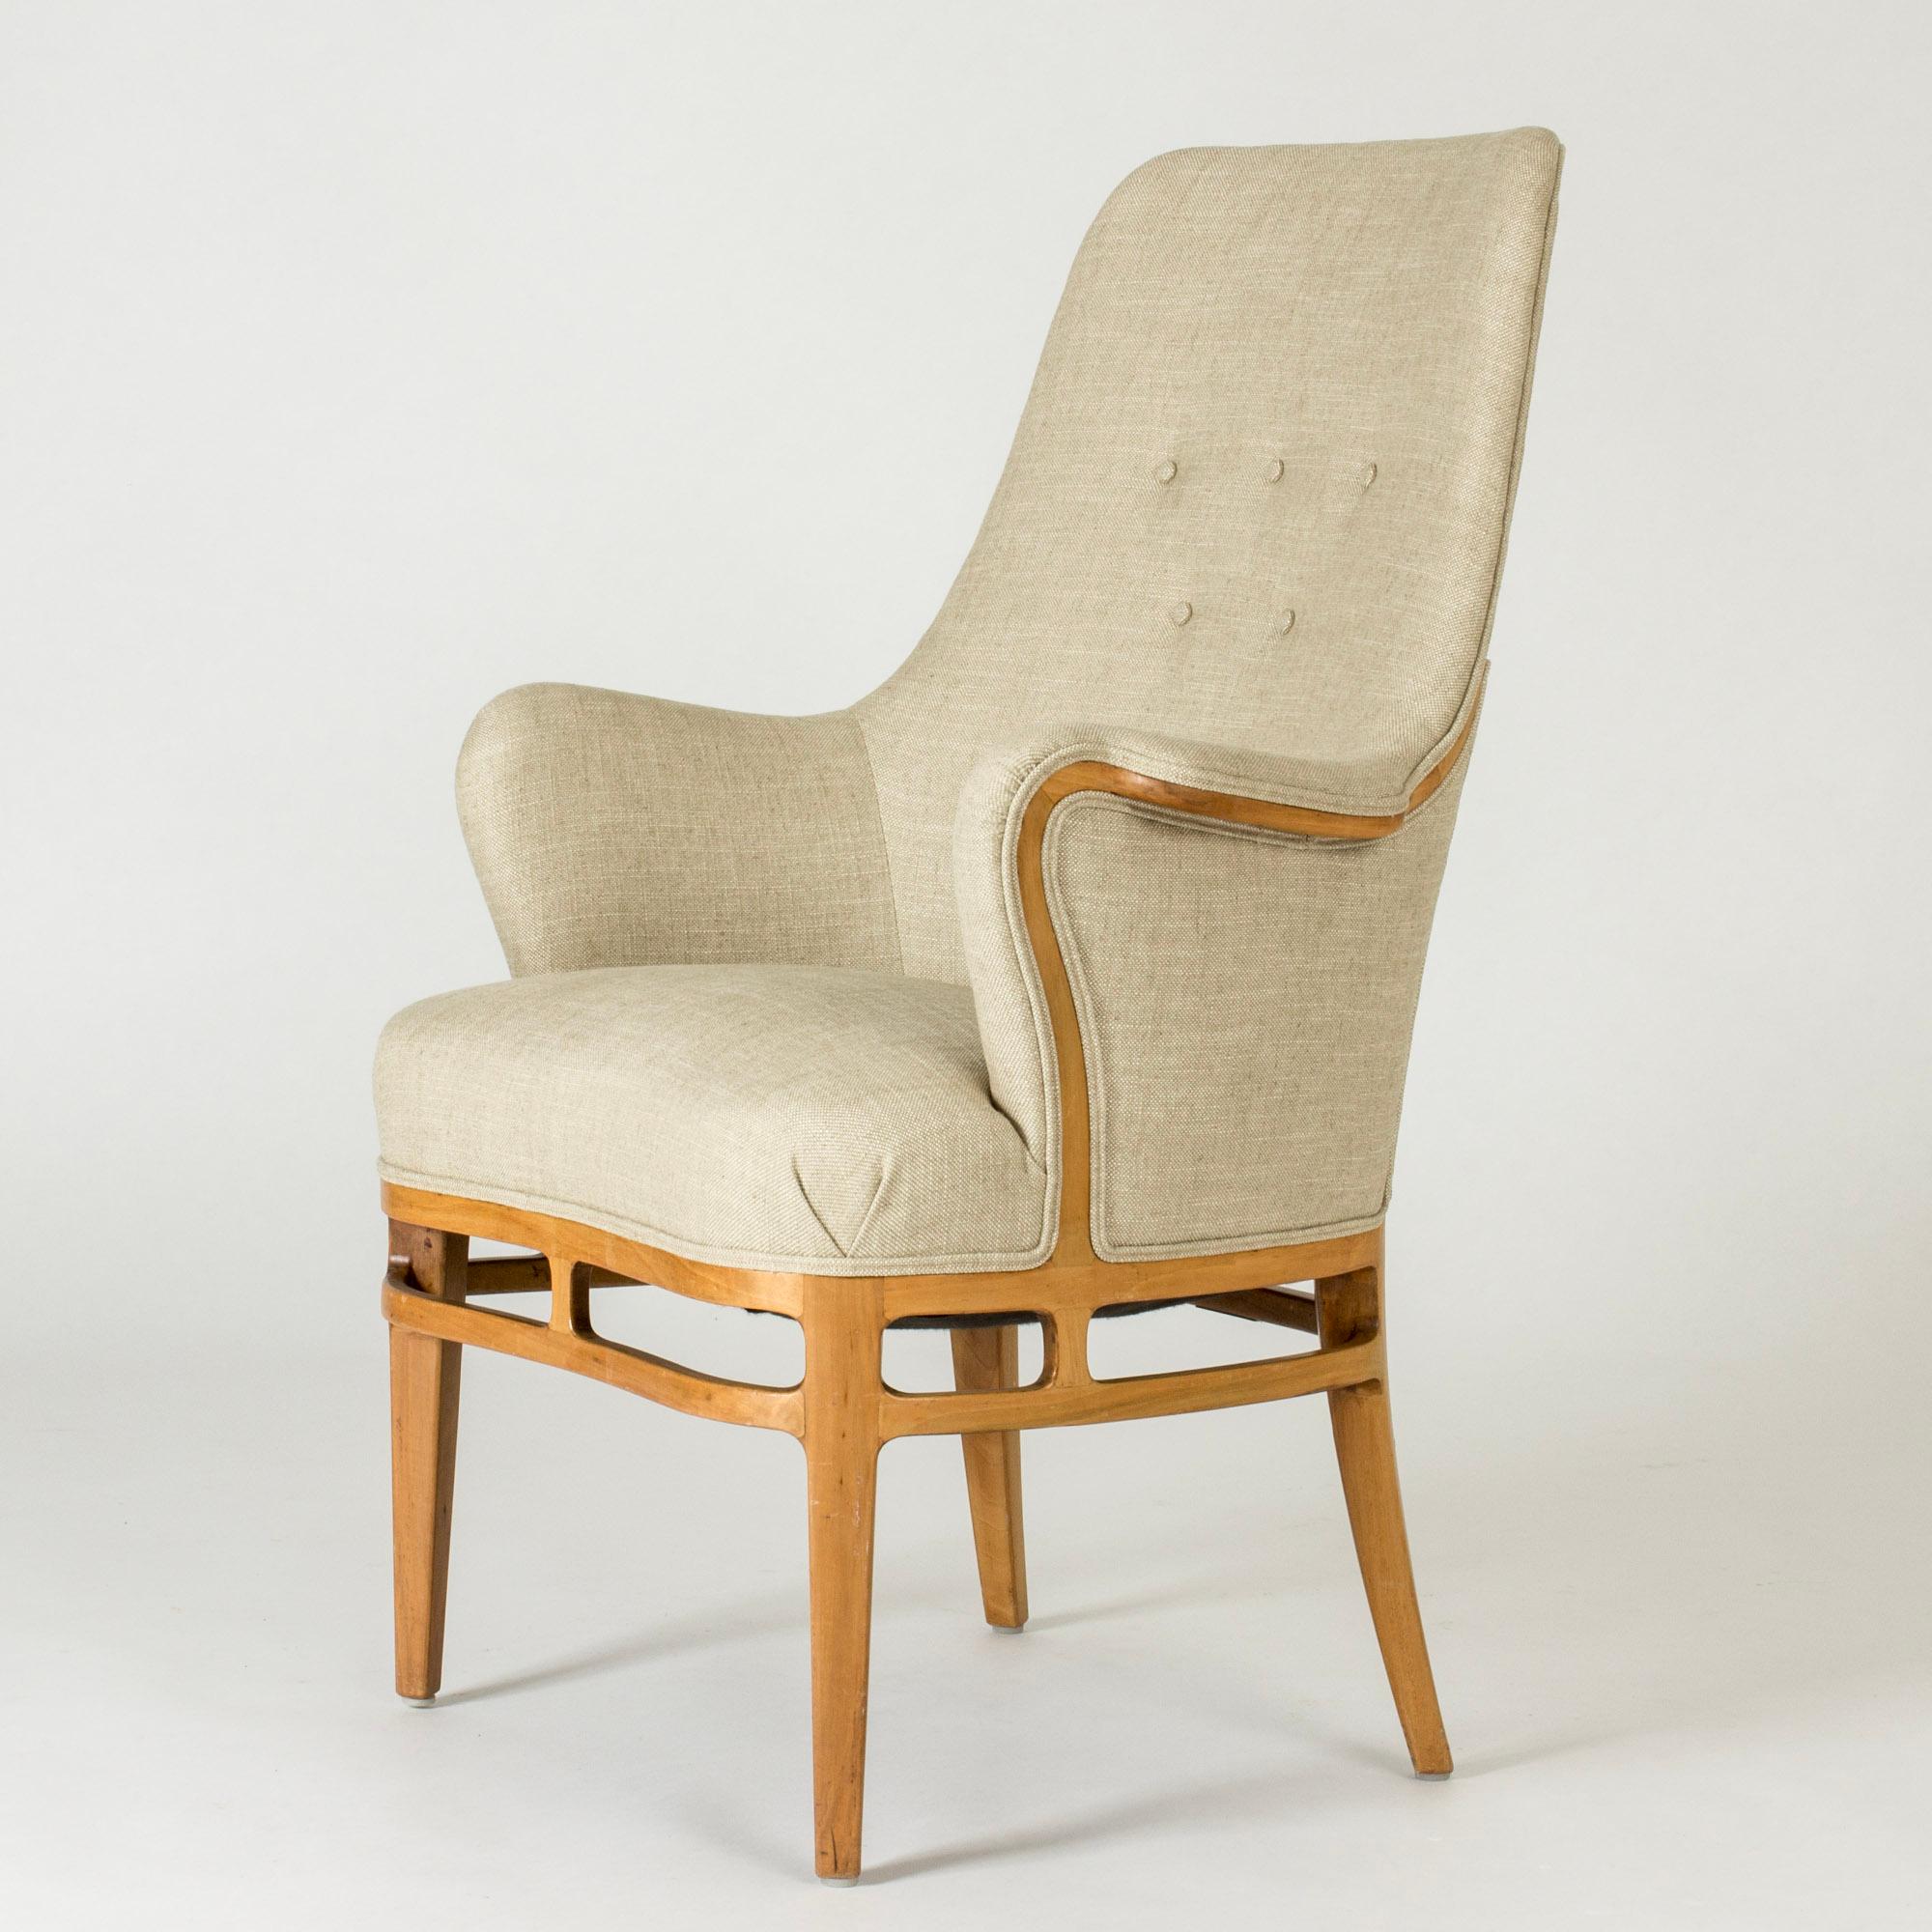 Elegant lounge or armchair by Carl-Axel Acking, made in walnut and upholstered with linen. Beautiful carved decor around the base of the seat and lines of wood following the curves of the armrests and back. Decorative piping.